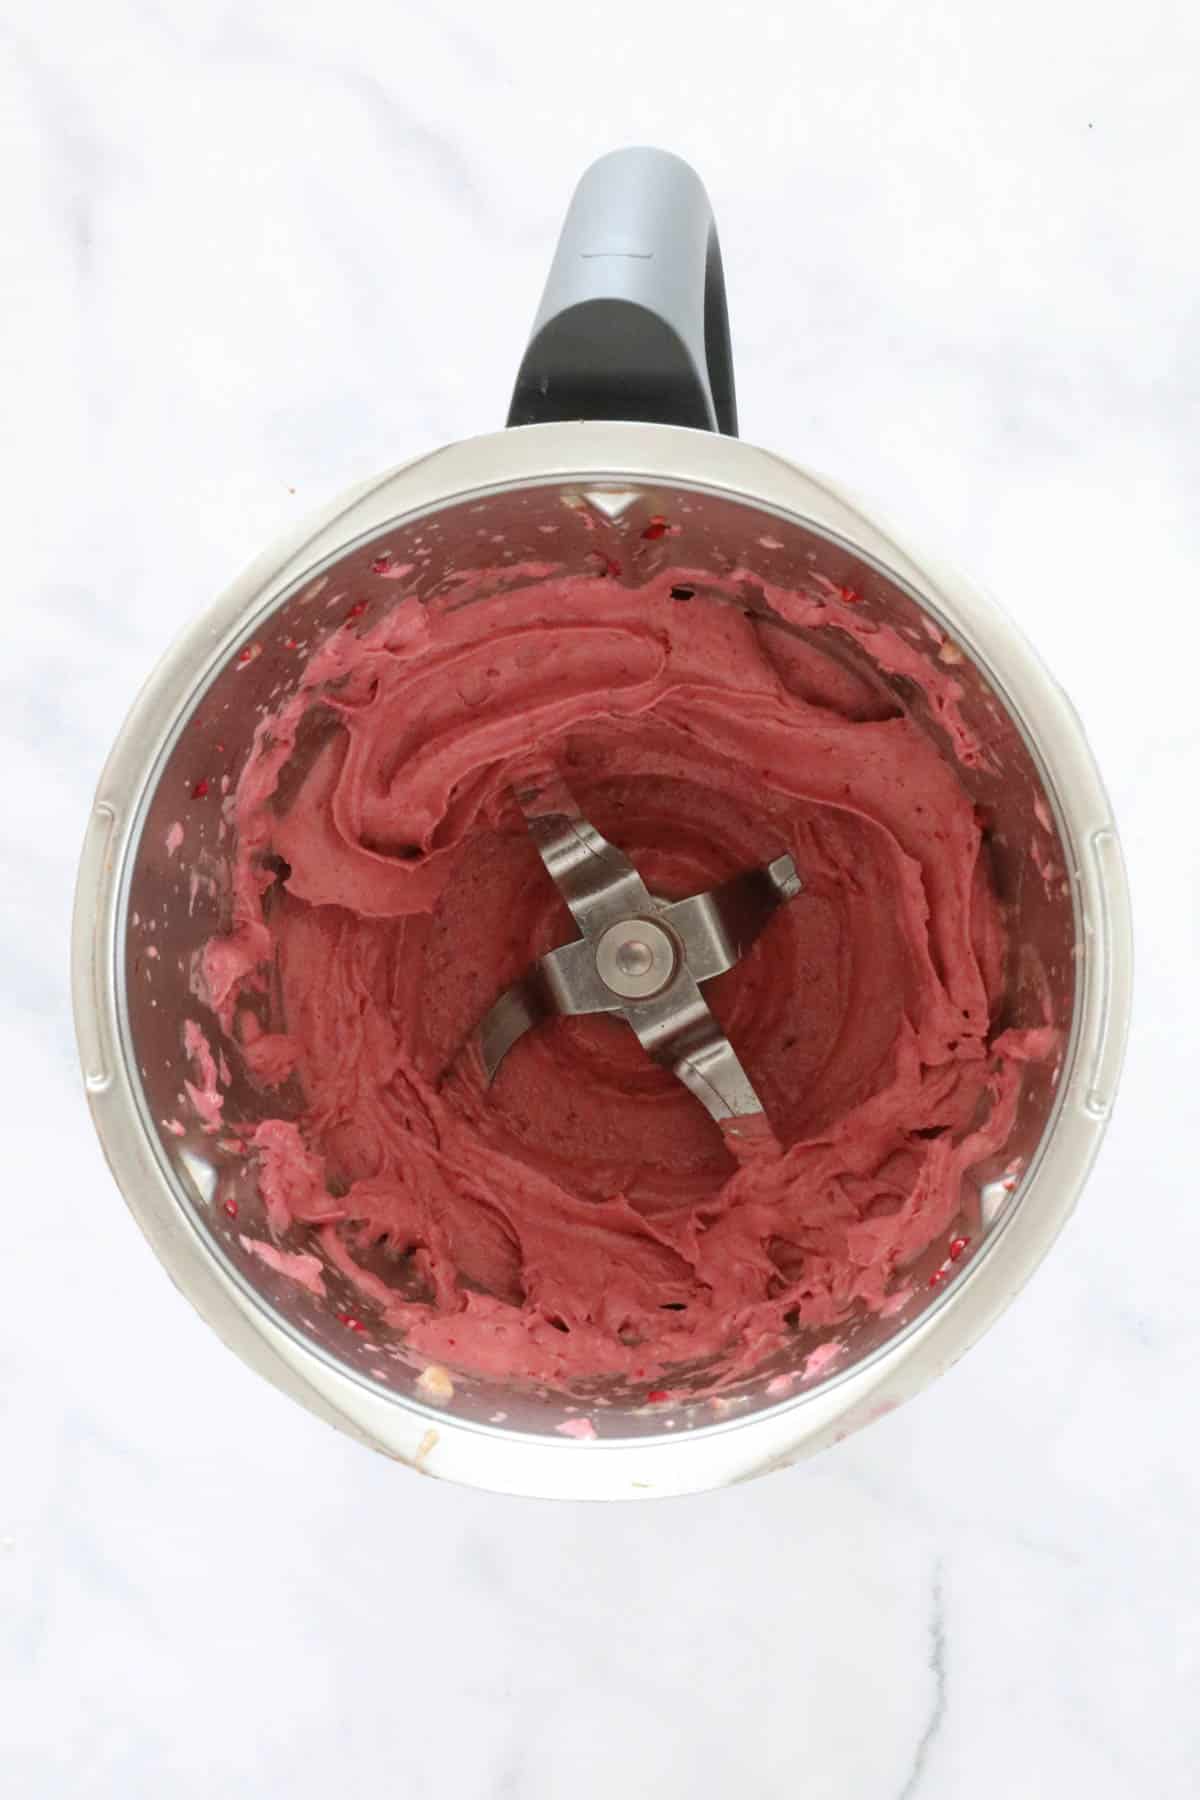 Raspberry icy soft-serve in a Thermomix.